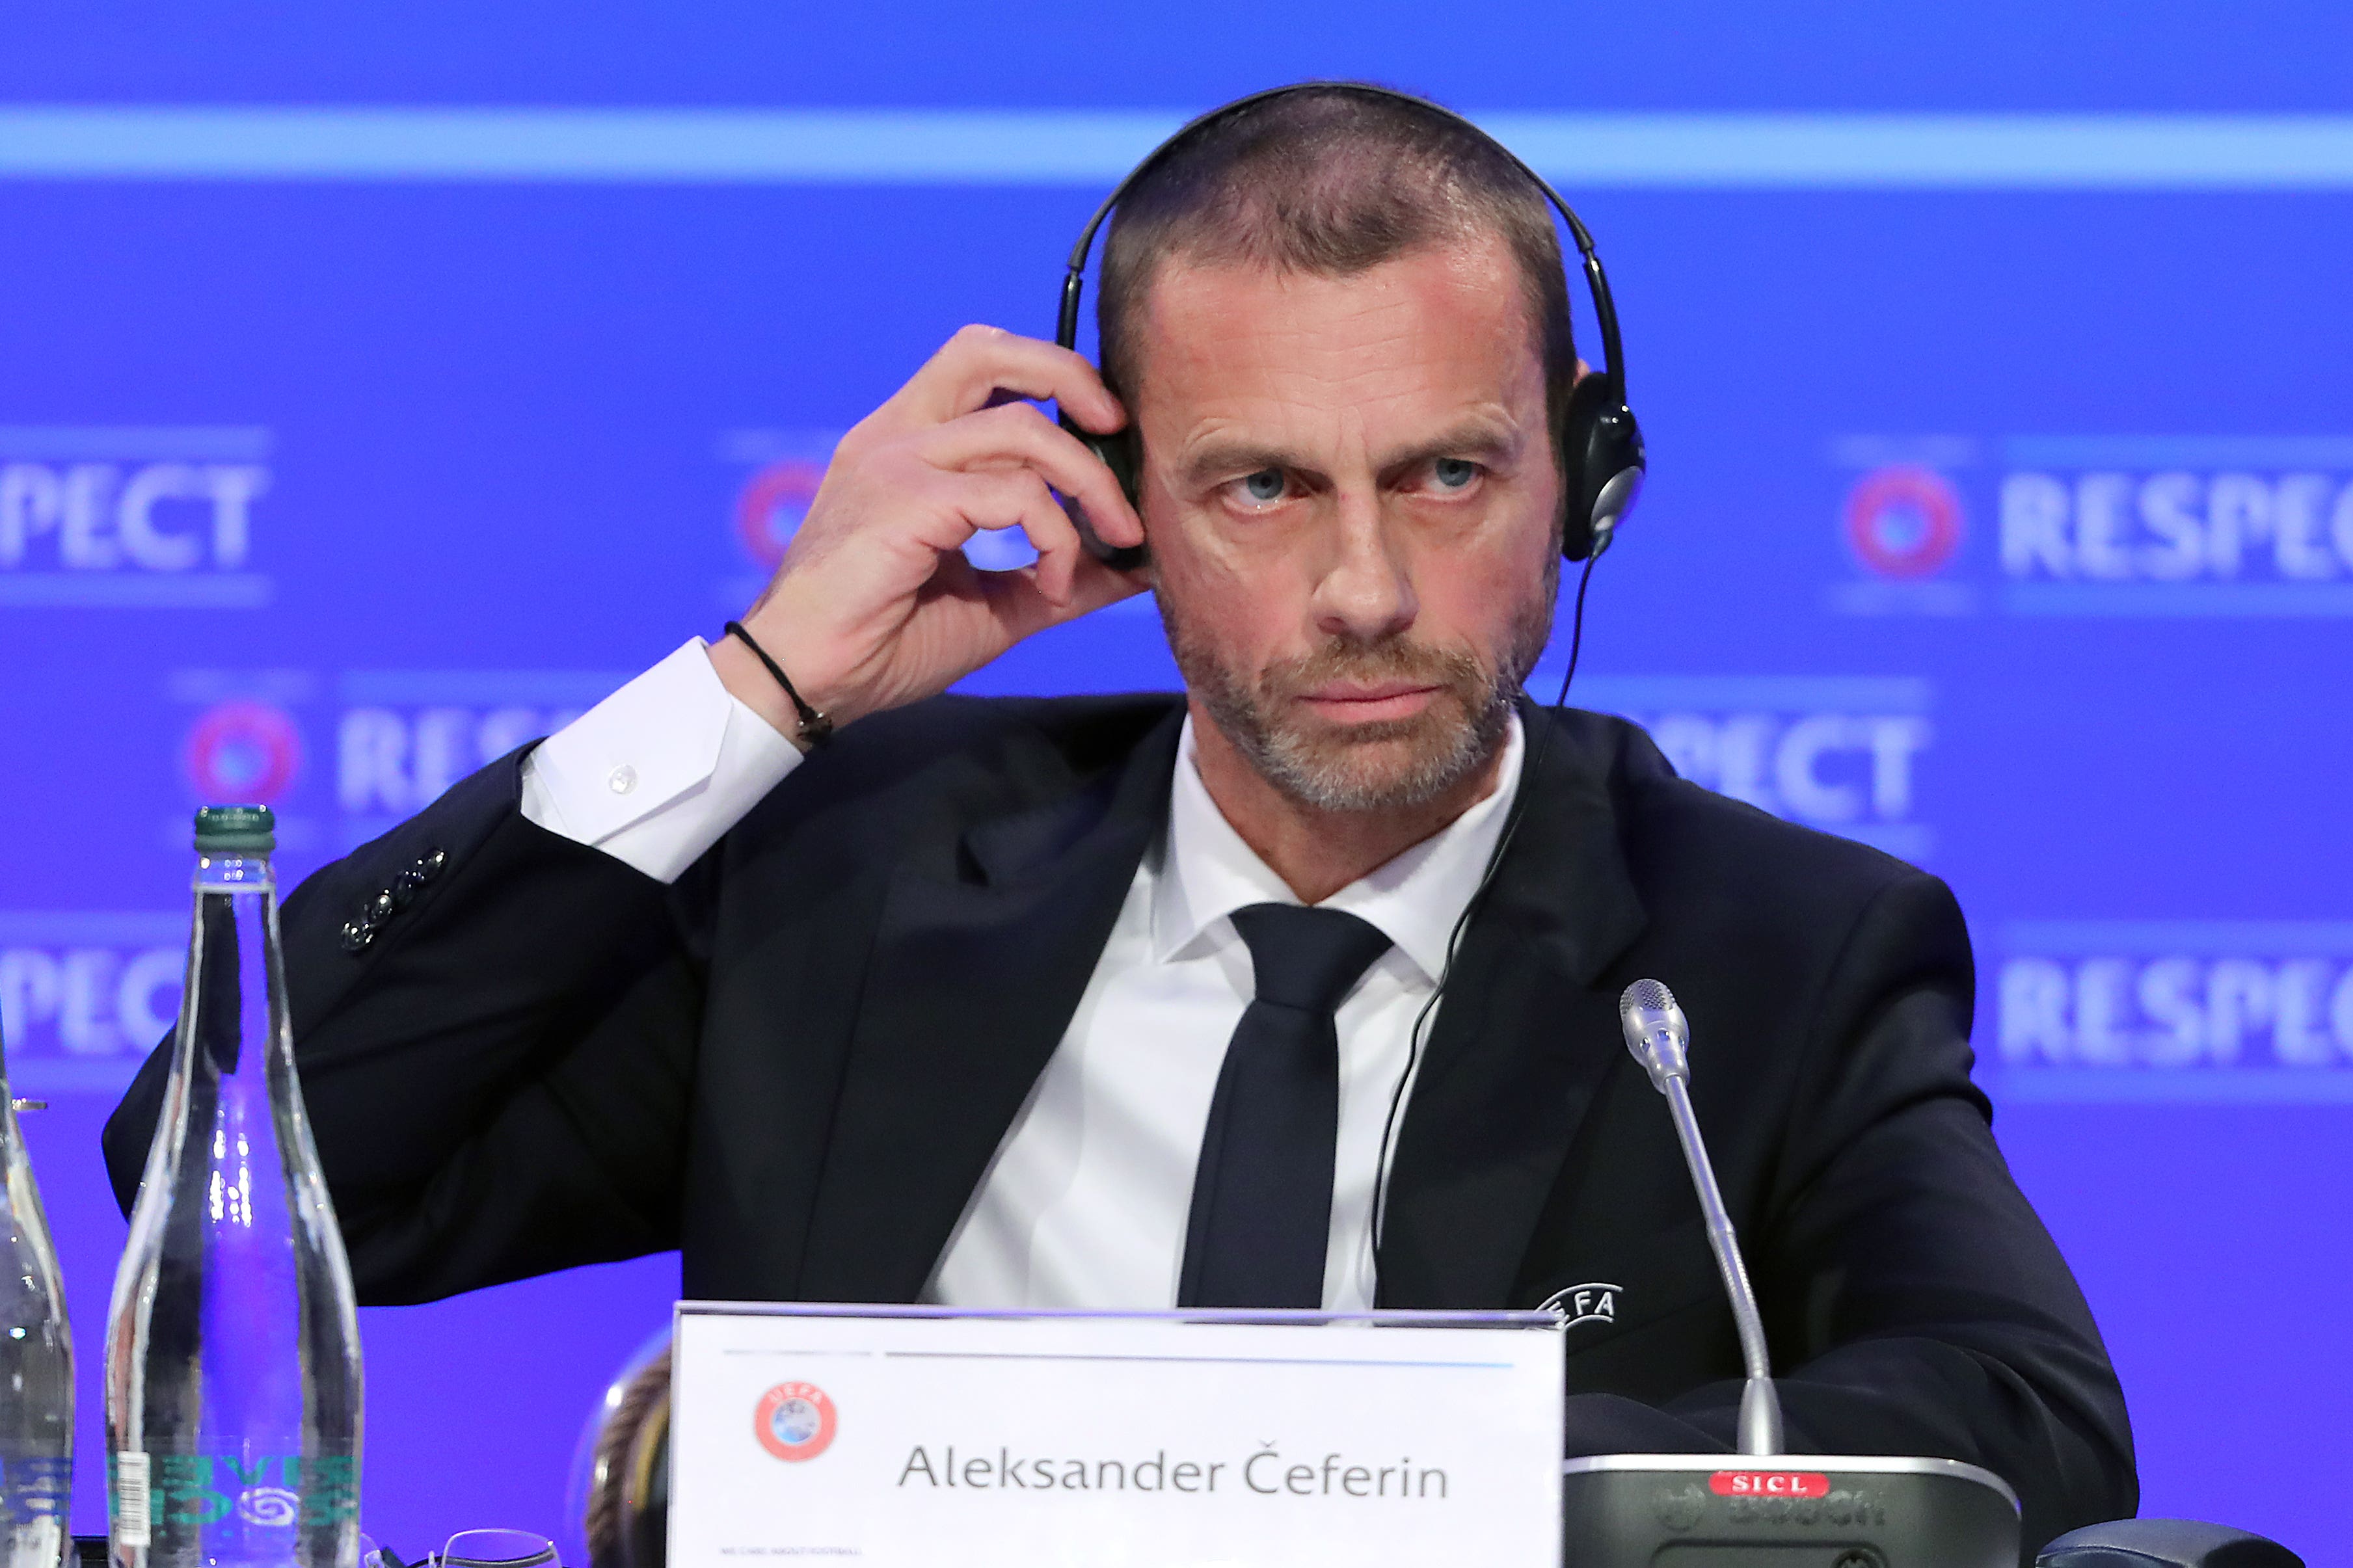 UEFA president Aleksander Ceferin accepted the fan experience at the Champions League final in Istanbul was not perfect (Niall Carson/PA).